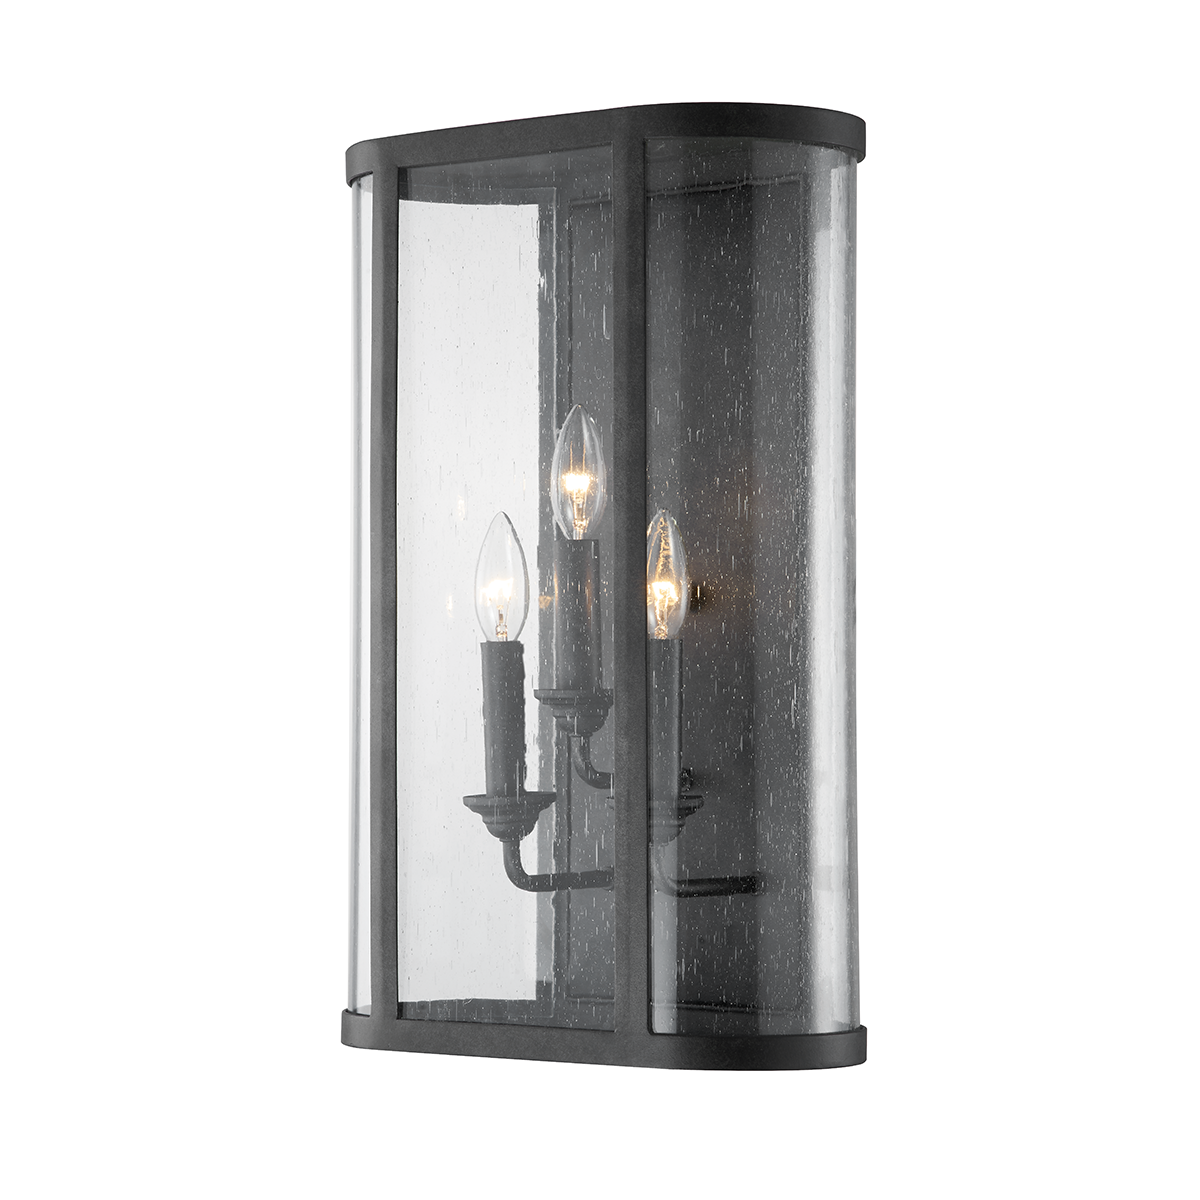 Troy Lighting 3 LIGHT LARGE EXTERIOR WALL SCONCE B3403 Outdoor l Wall Troy Lighting FORGED IRON  